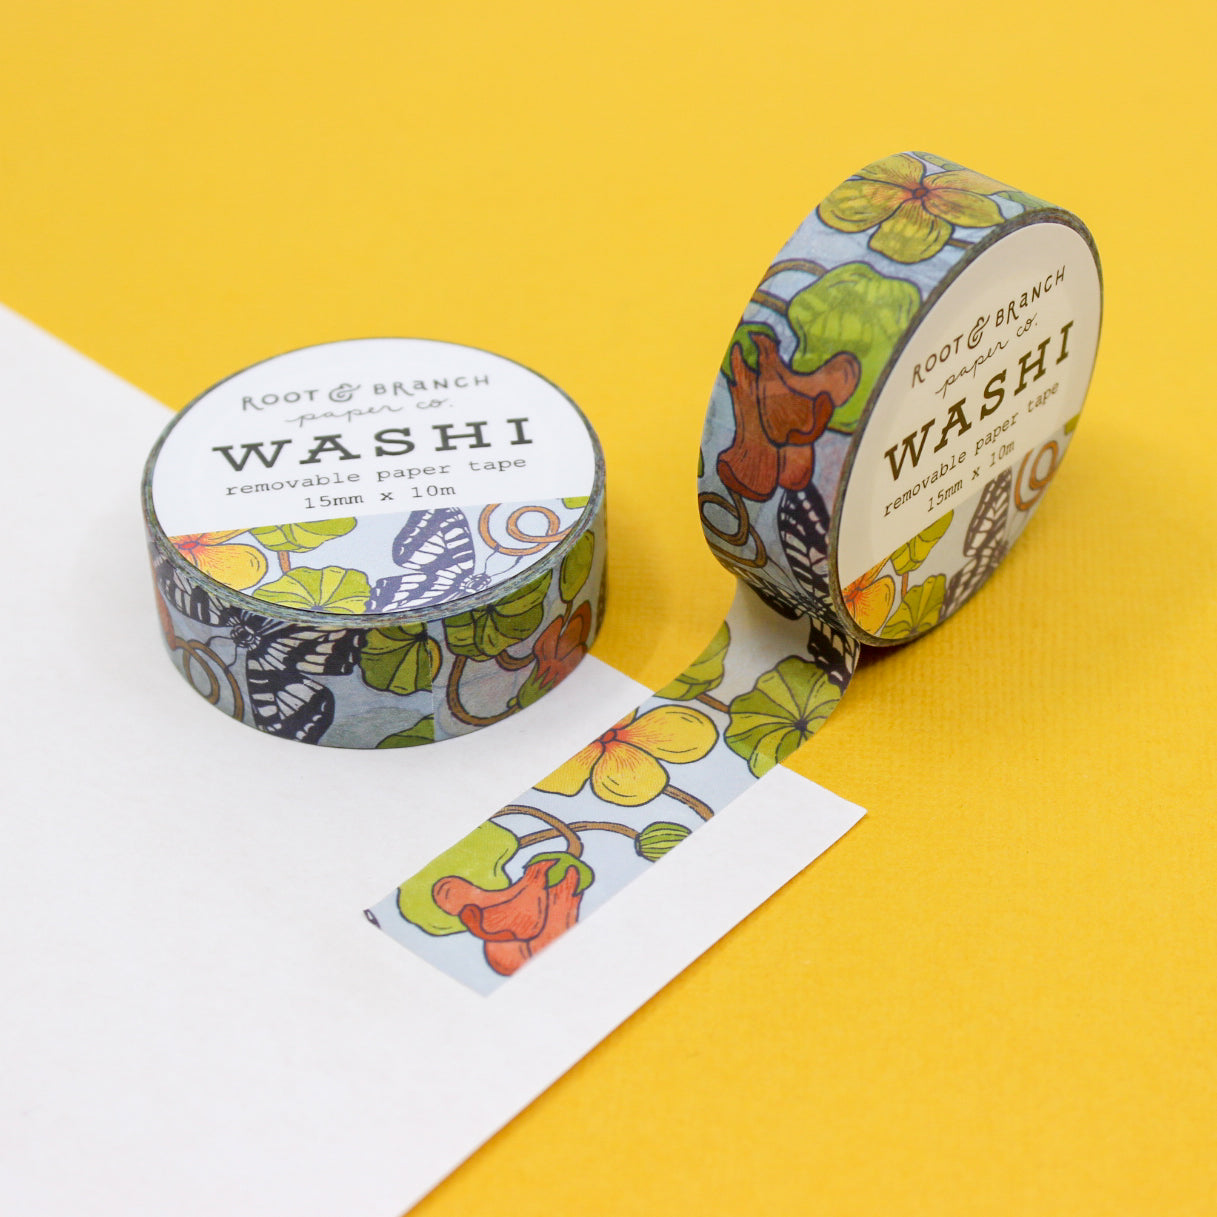 Nasturtium Garden and Swallowtail Butterfly Washi Tape, showcasing vibrant nasturtium blooms amidst graceful swallowtail butterflies in a stunning design. This tape from Root & Branch Paper co. is sold at BBB Supplies Craft Shop.